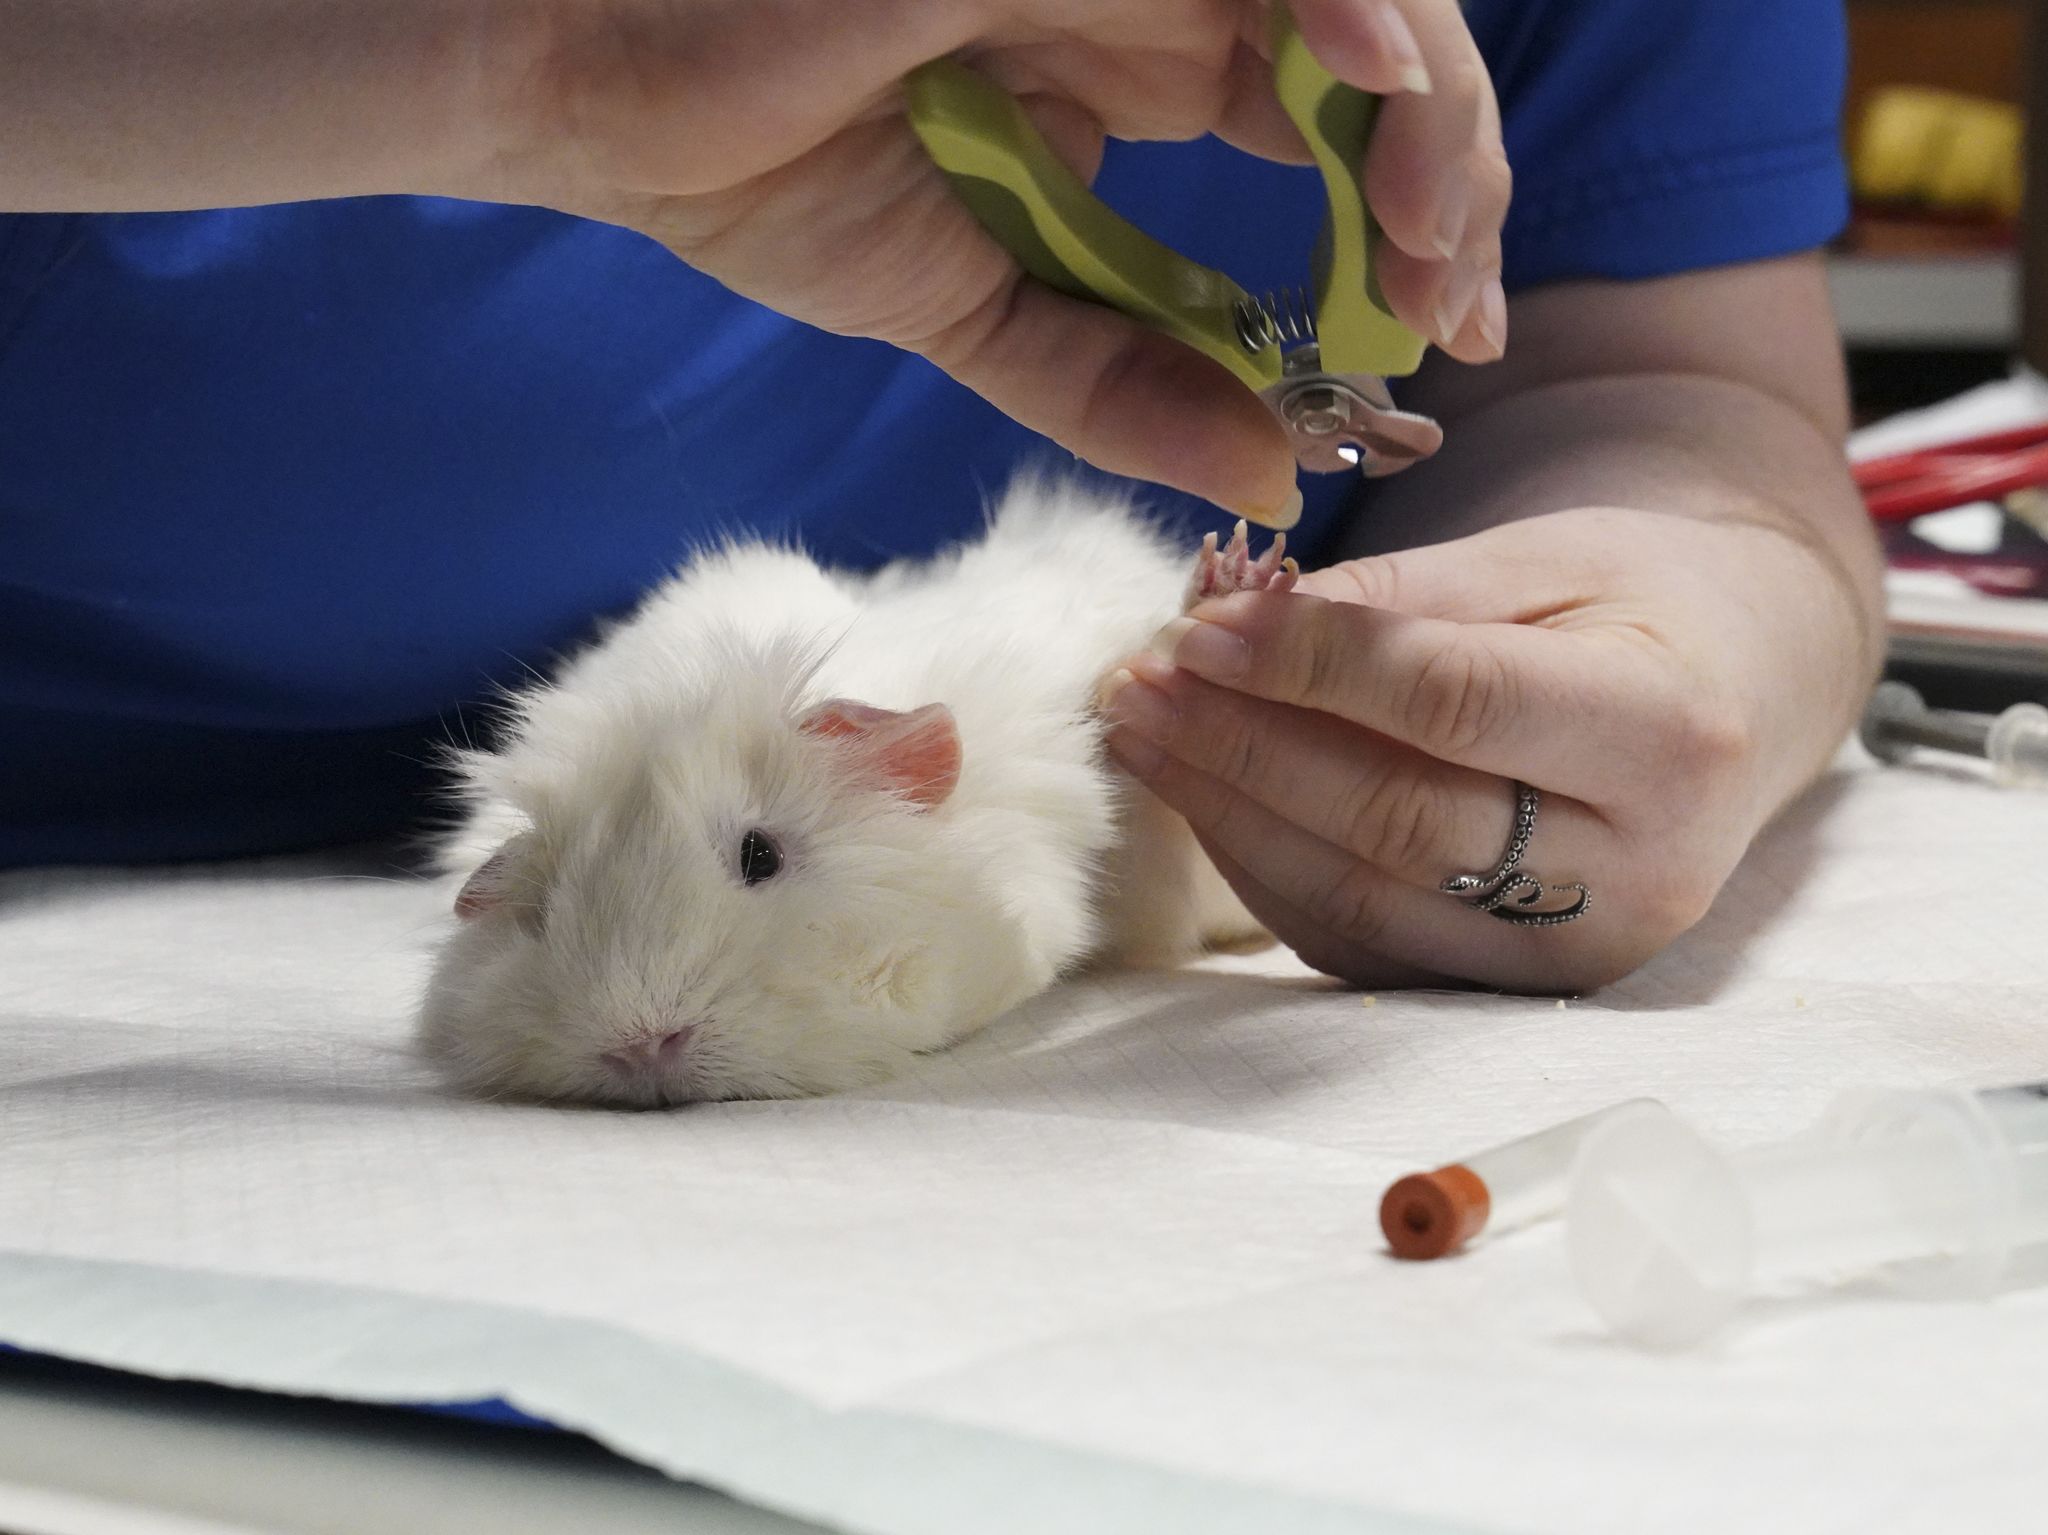 Vet Tech Tonya Green cuts Barbie the guinea pig's nails. This image is from Dr. T Lone Star Vet. [Photo of the day - October 2020]